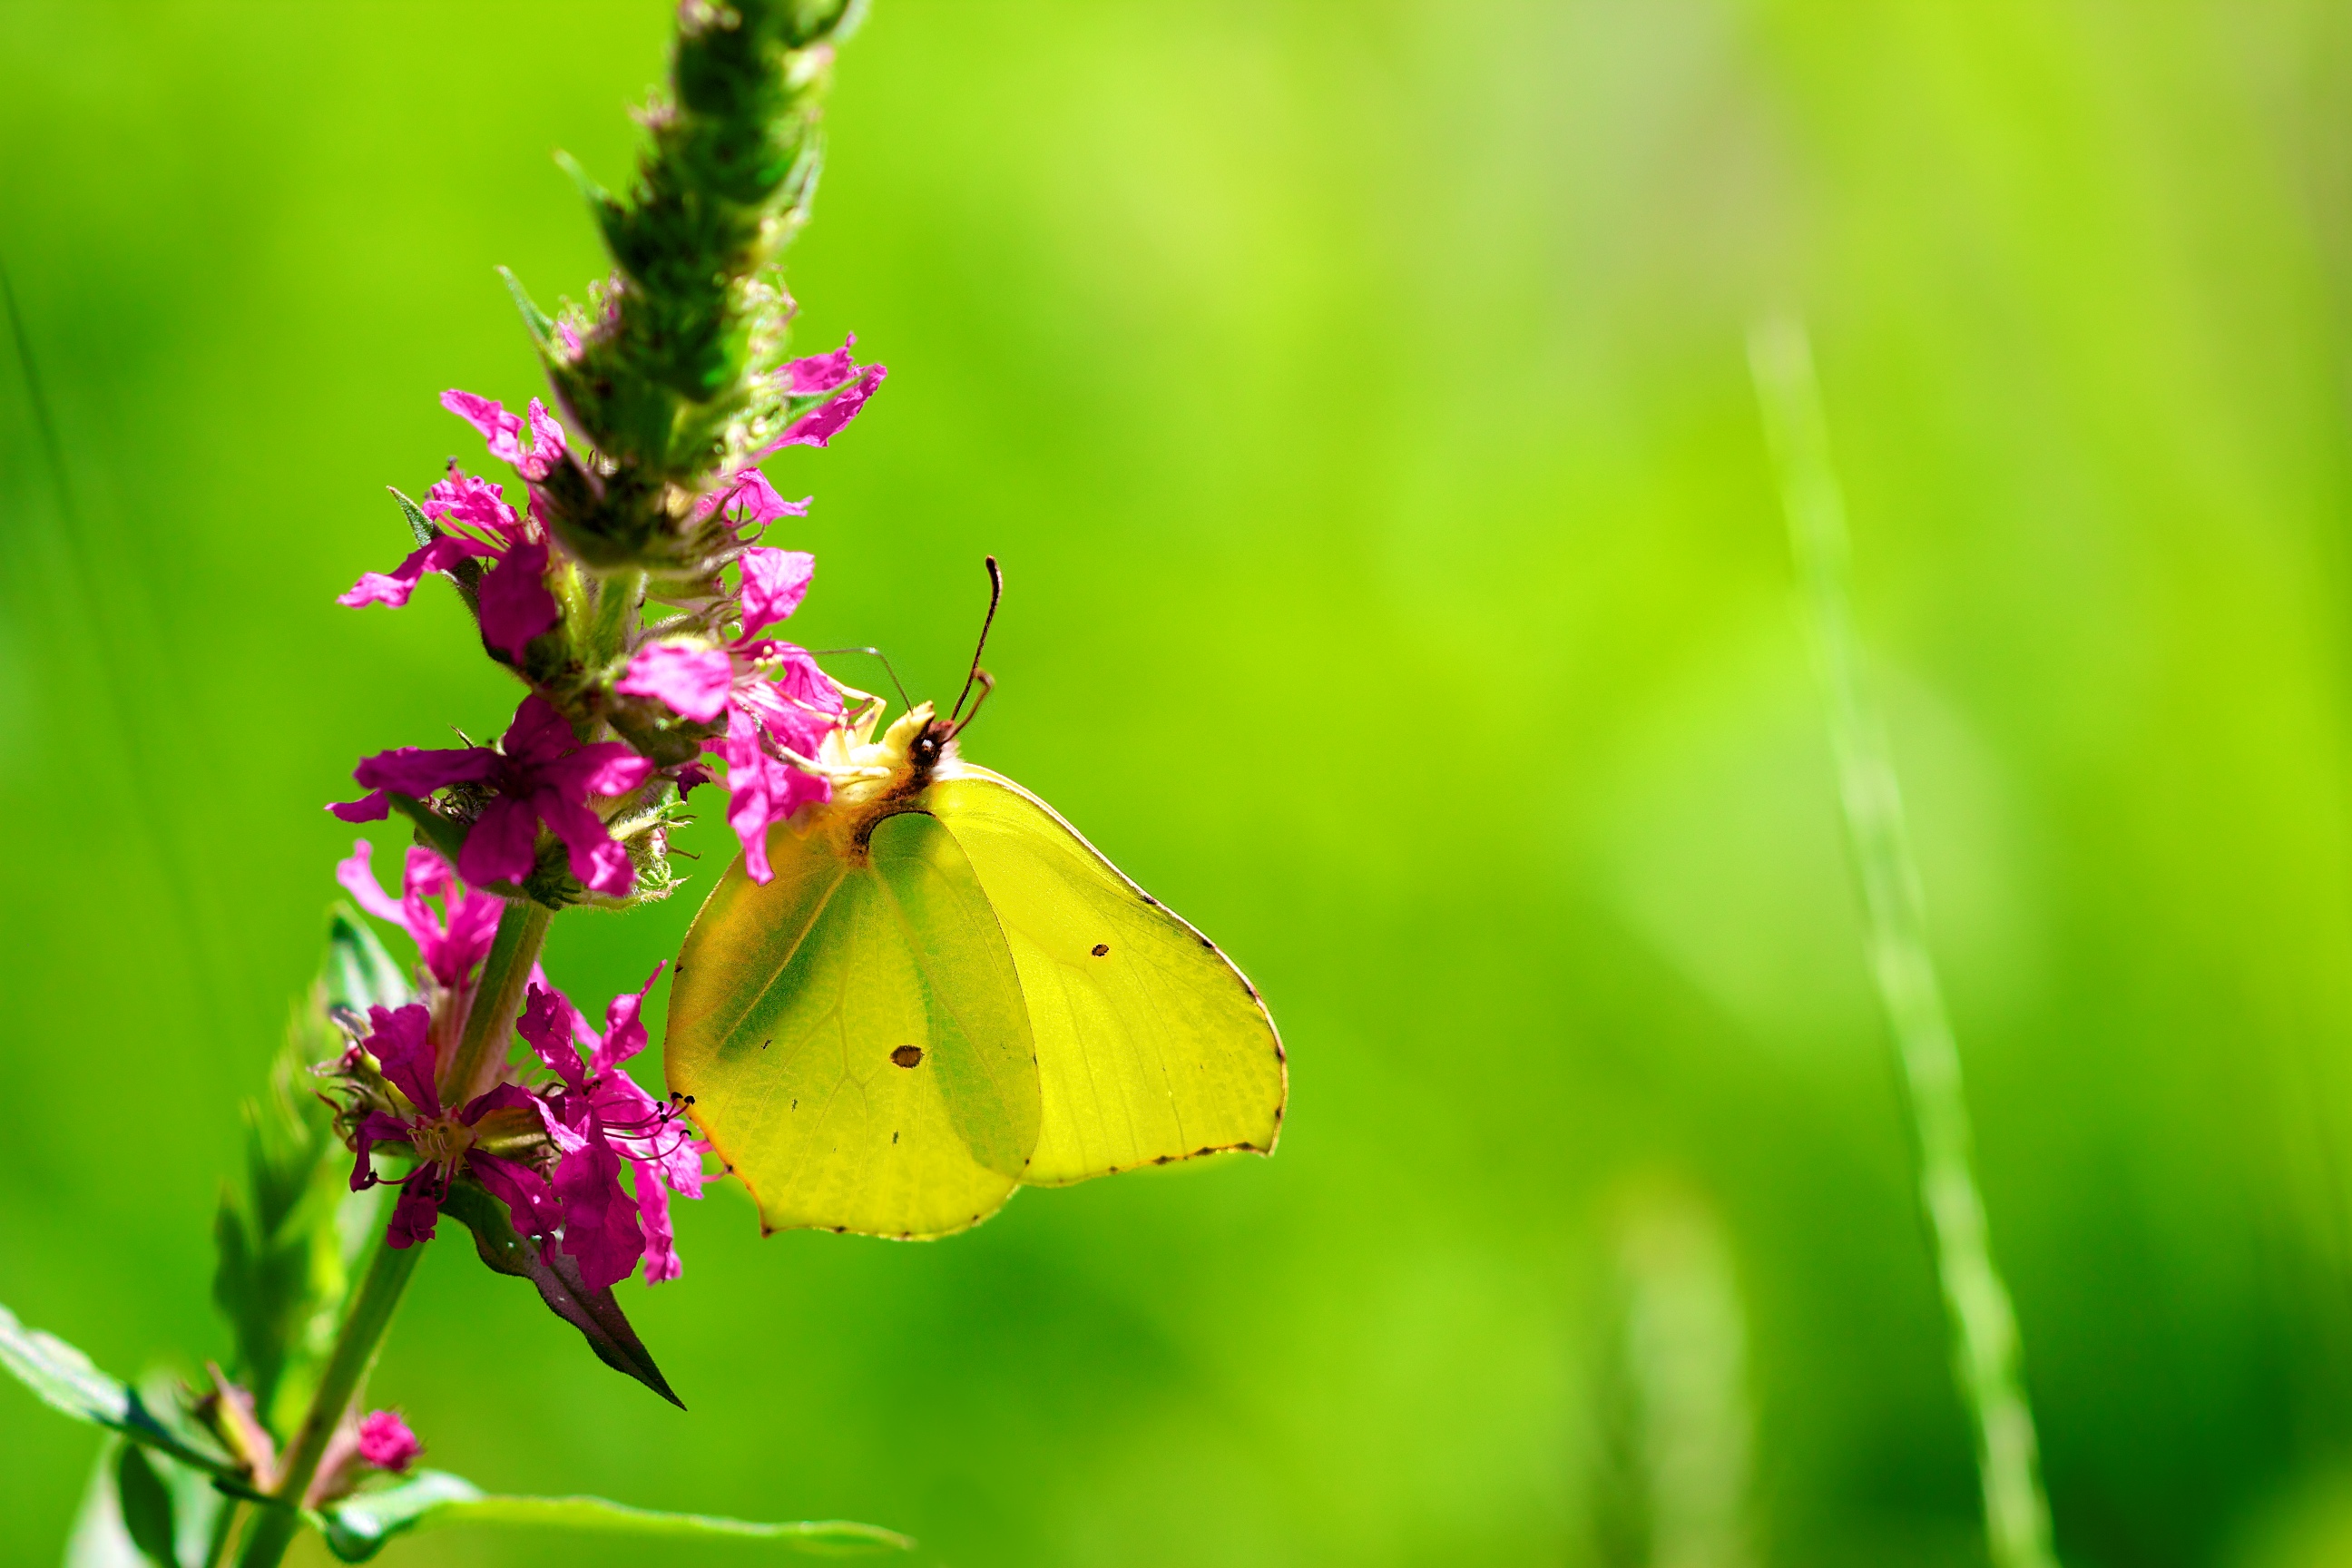 Wallpapers Animals Insects - Butterflies Citron jaune soleil